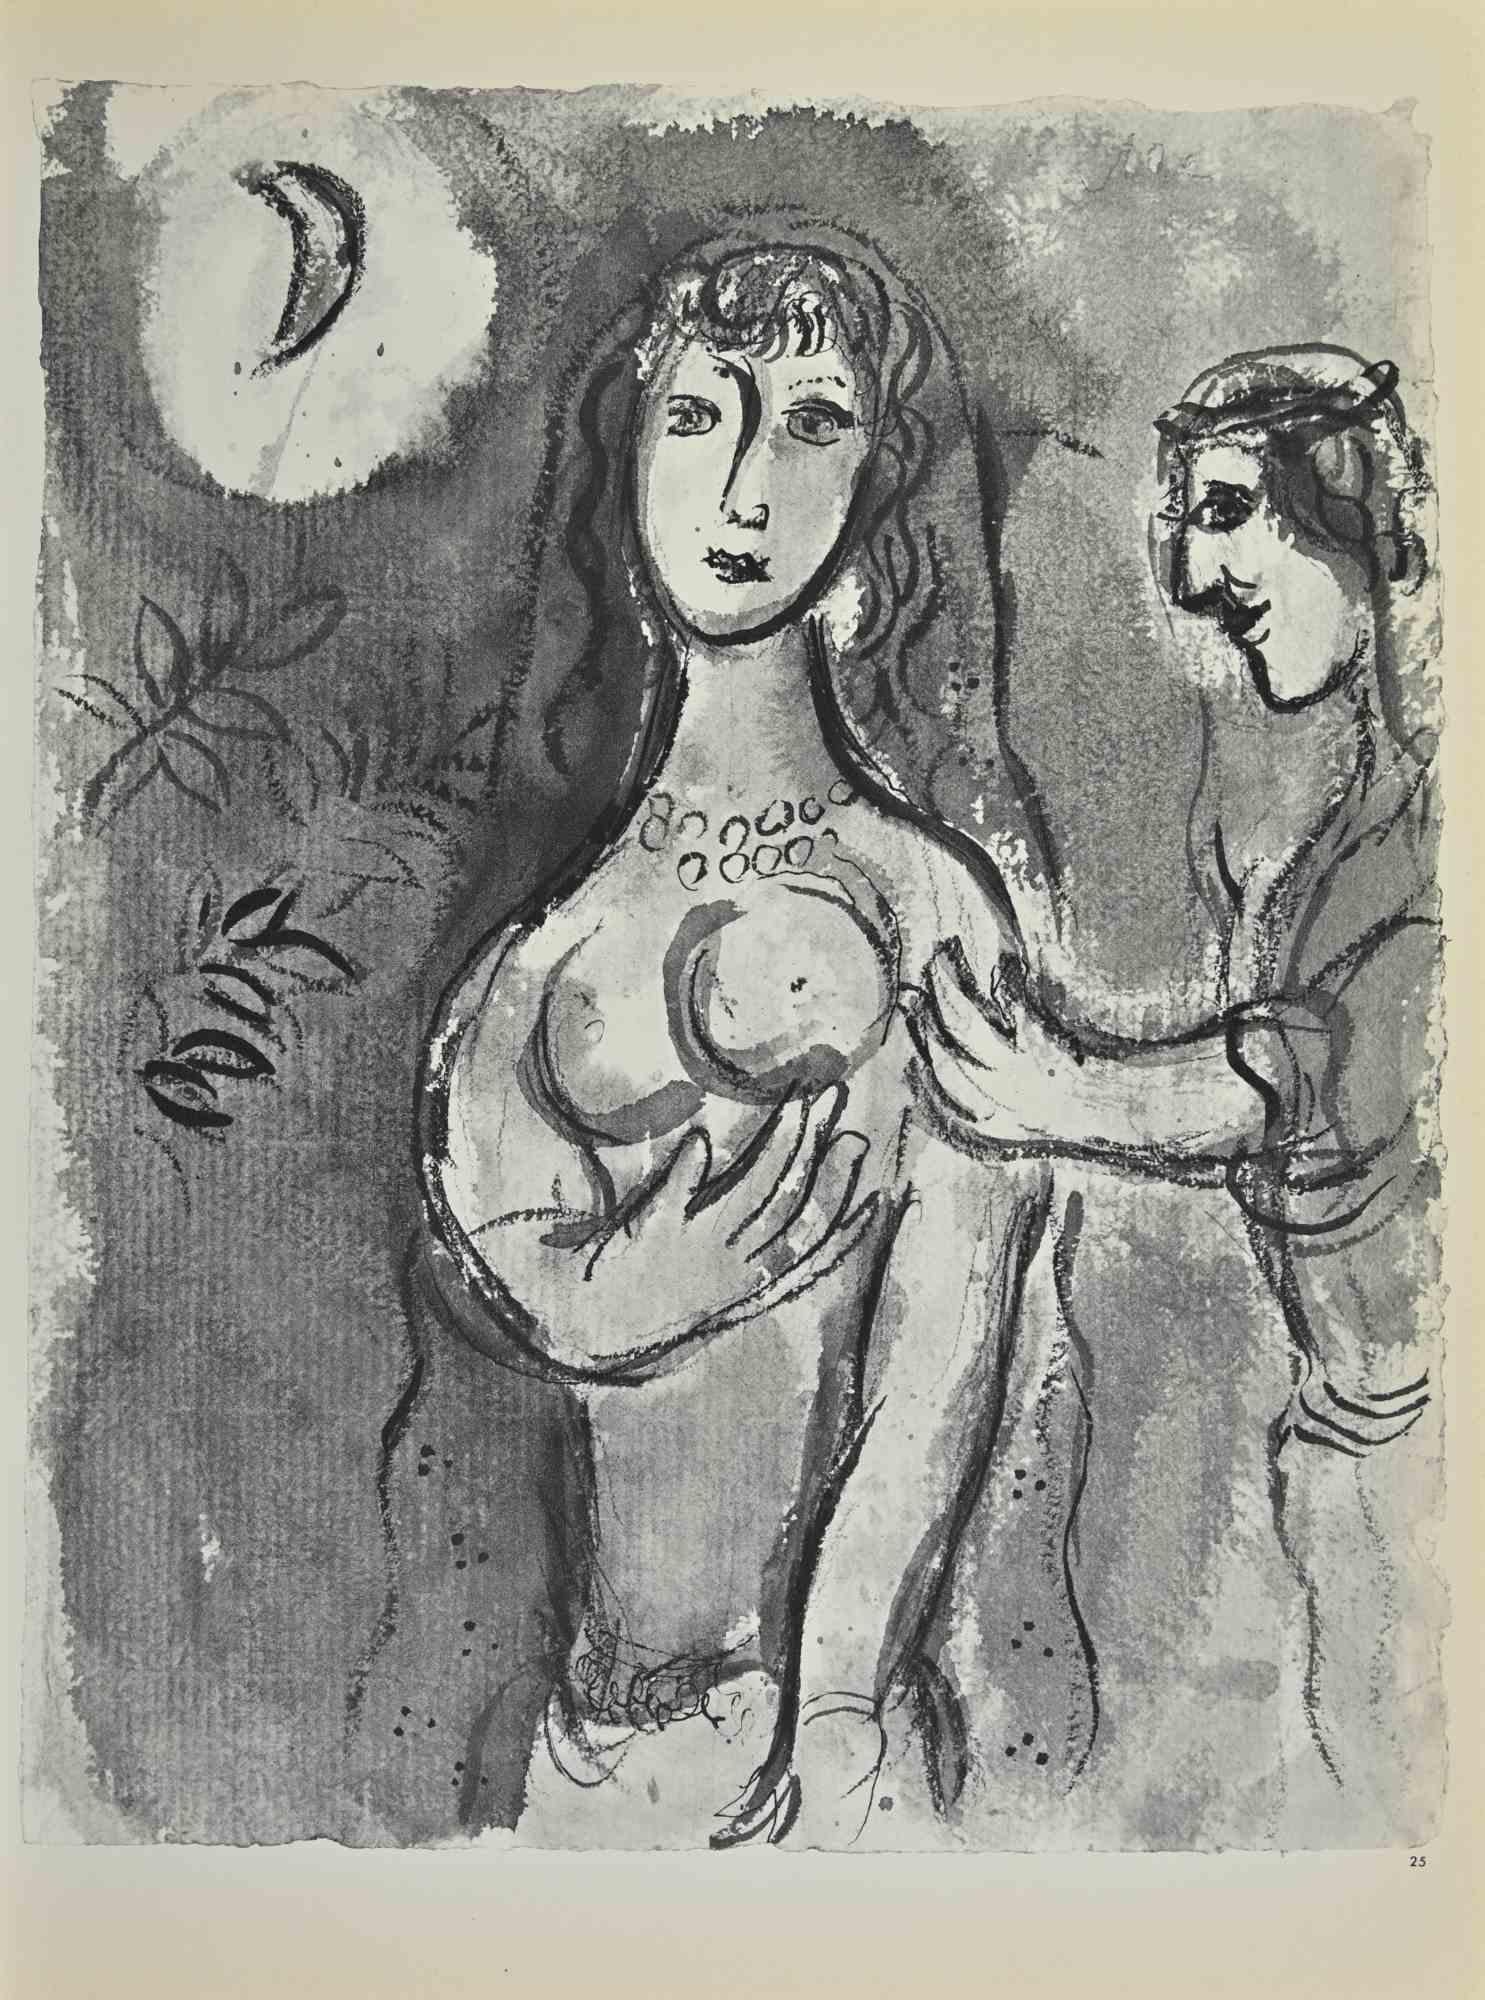 Rachel Goes Away with Jacob- Lithograph by Marc Chagall - 1960